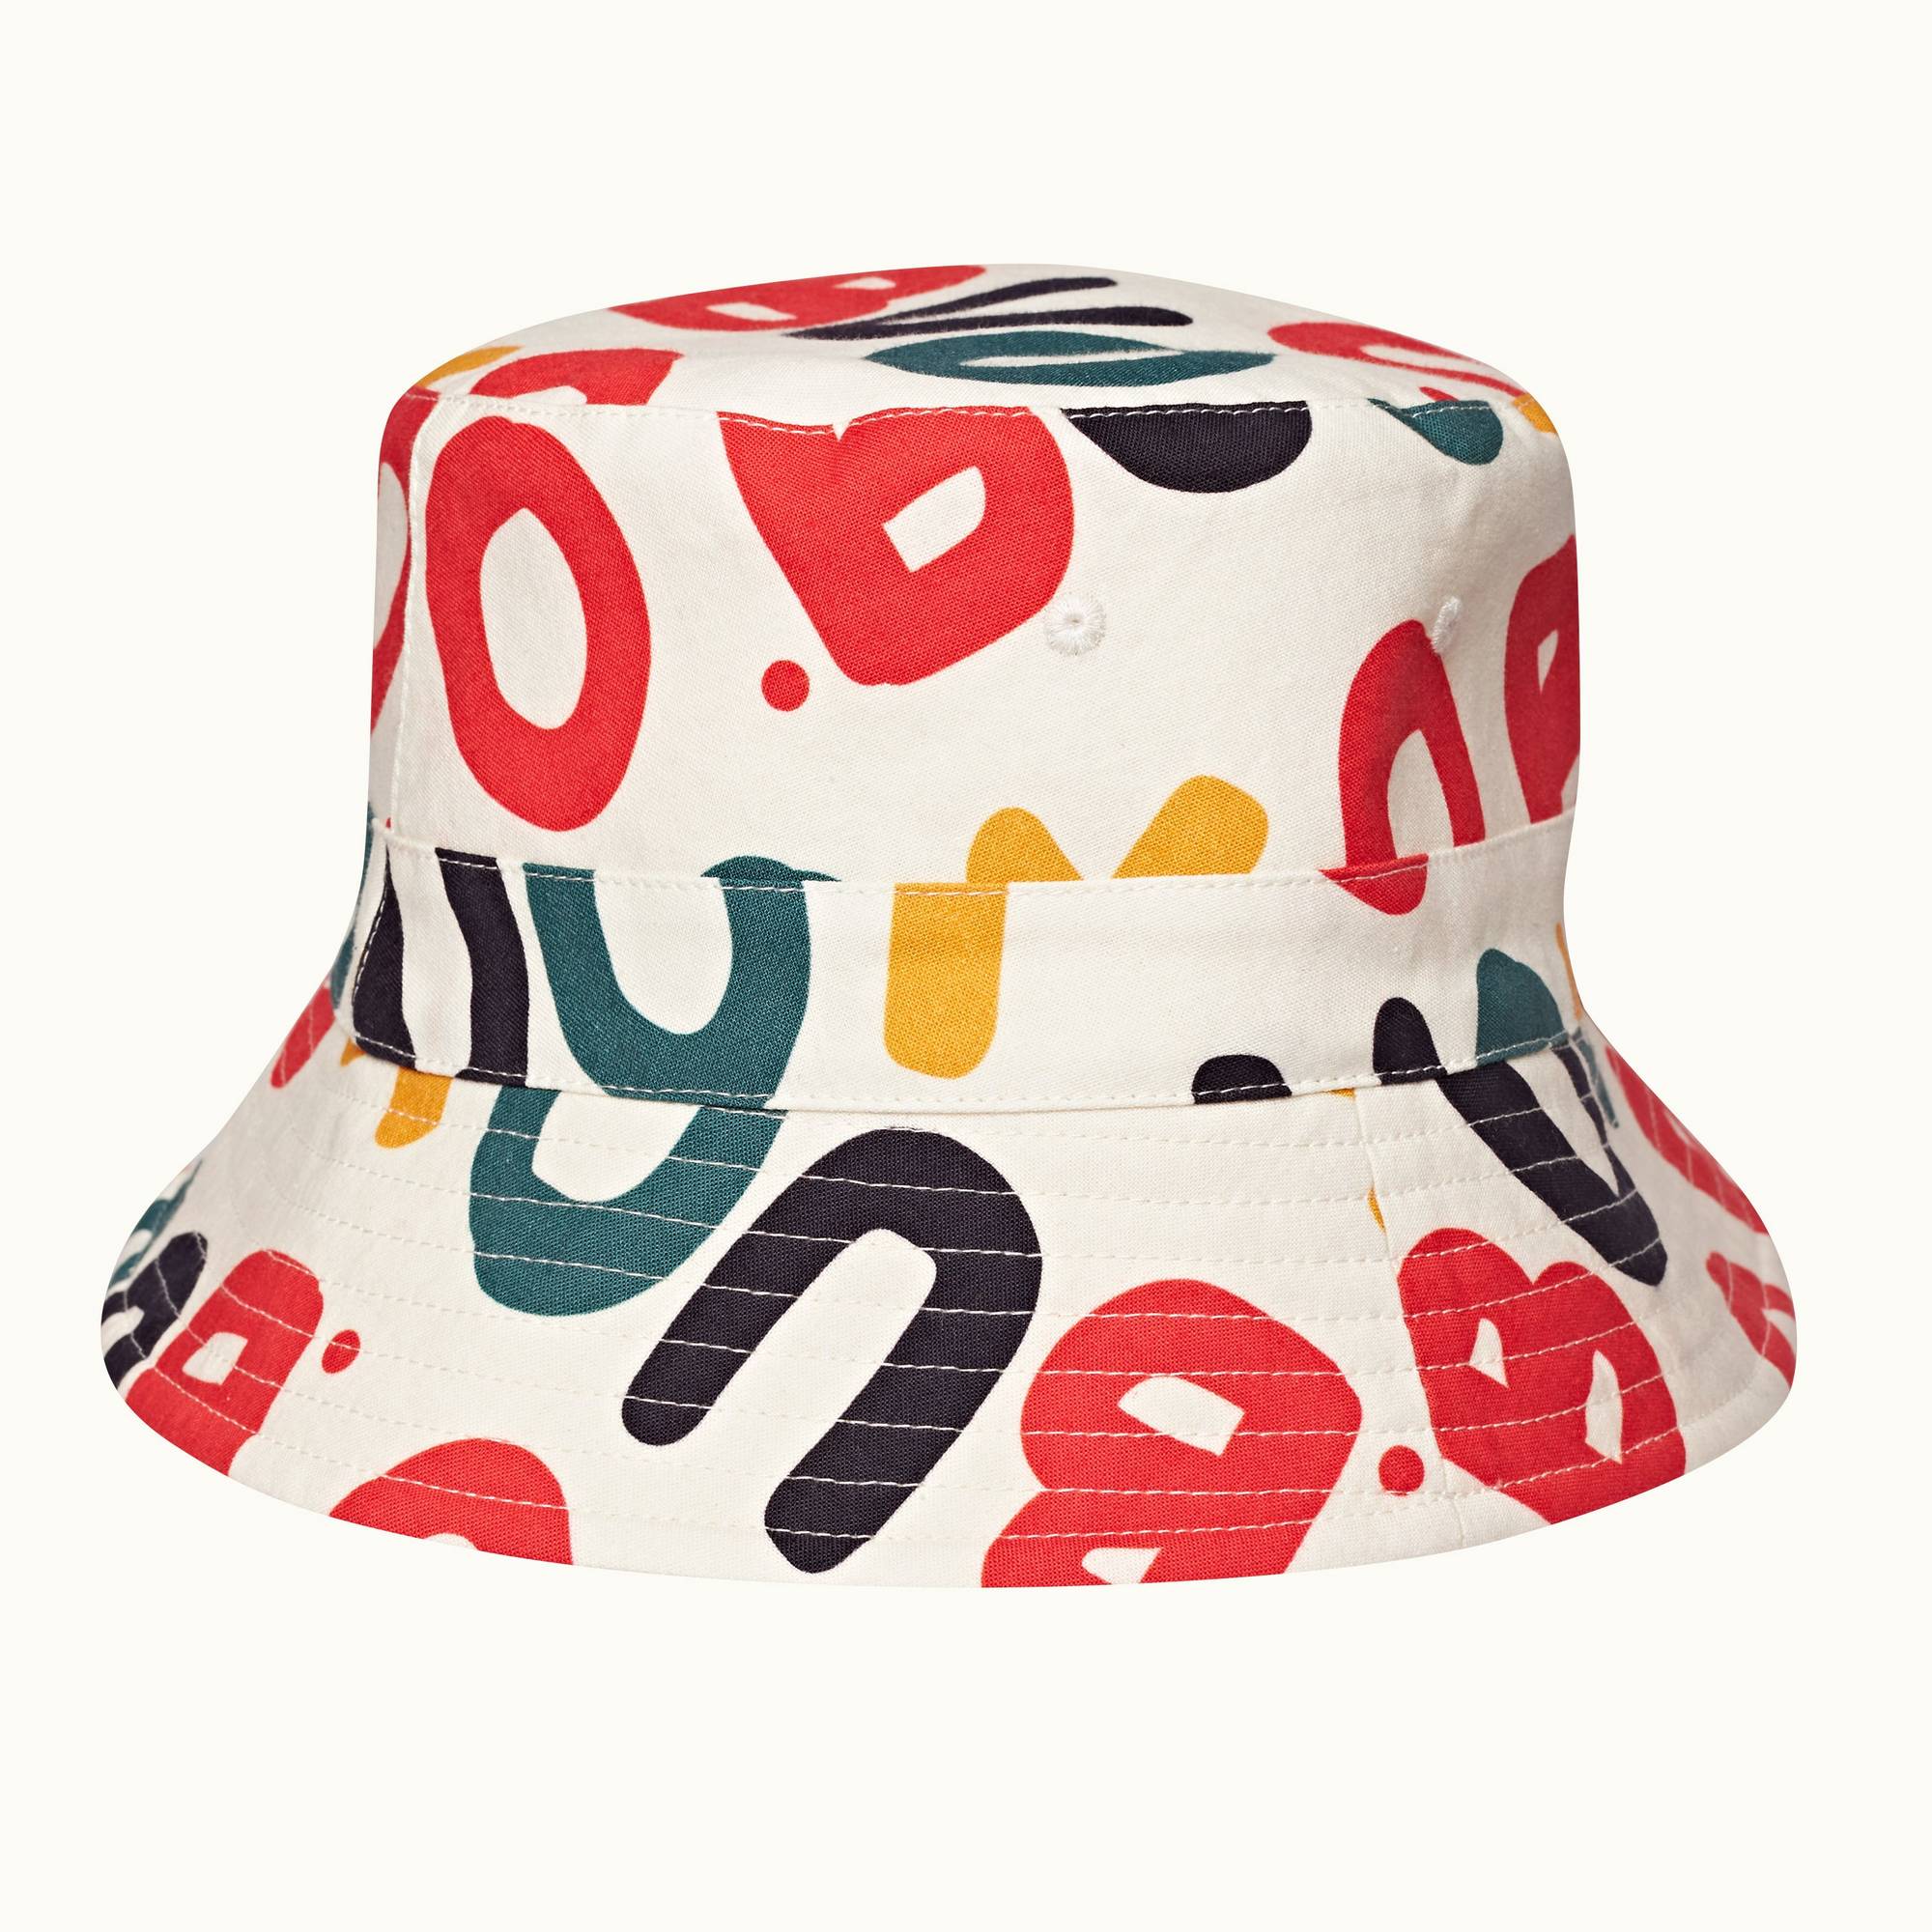 Blantyre Towelling - Mens White Sand O.BUOY Towelling Bucket Hat